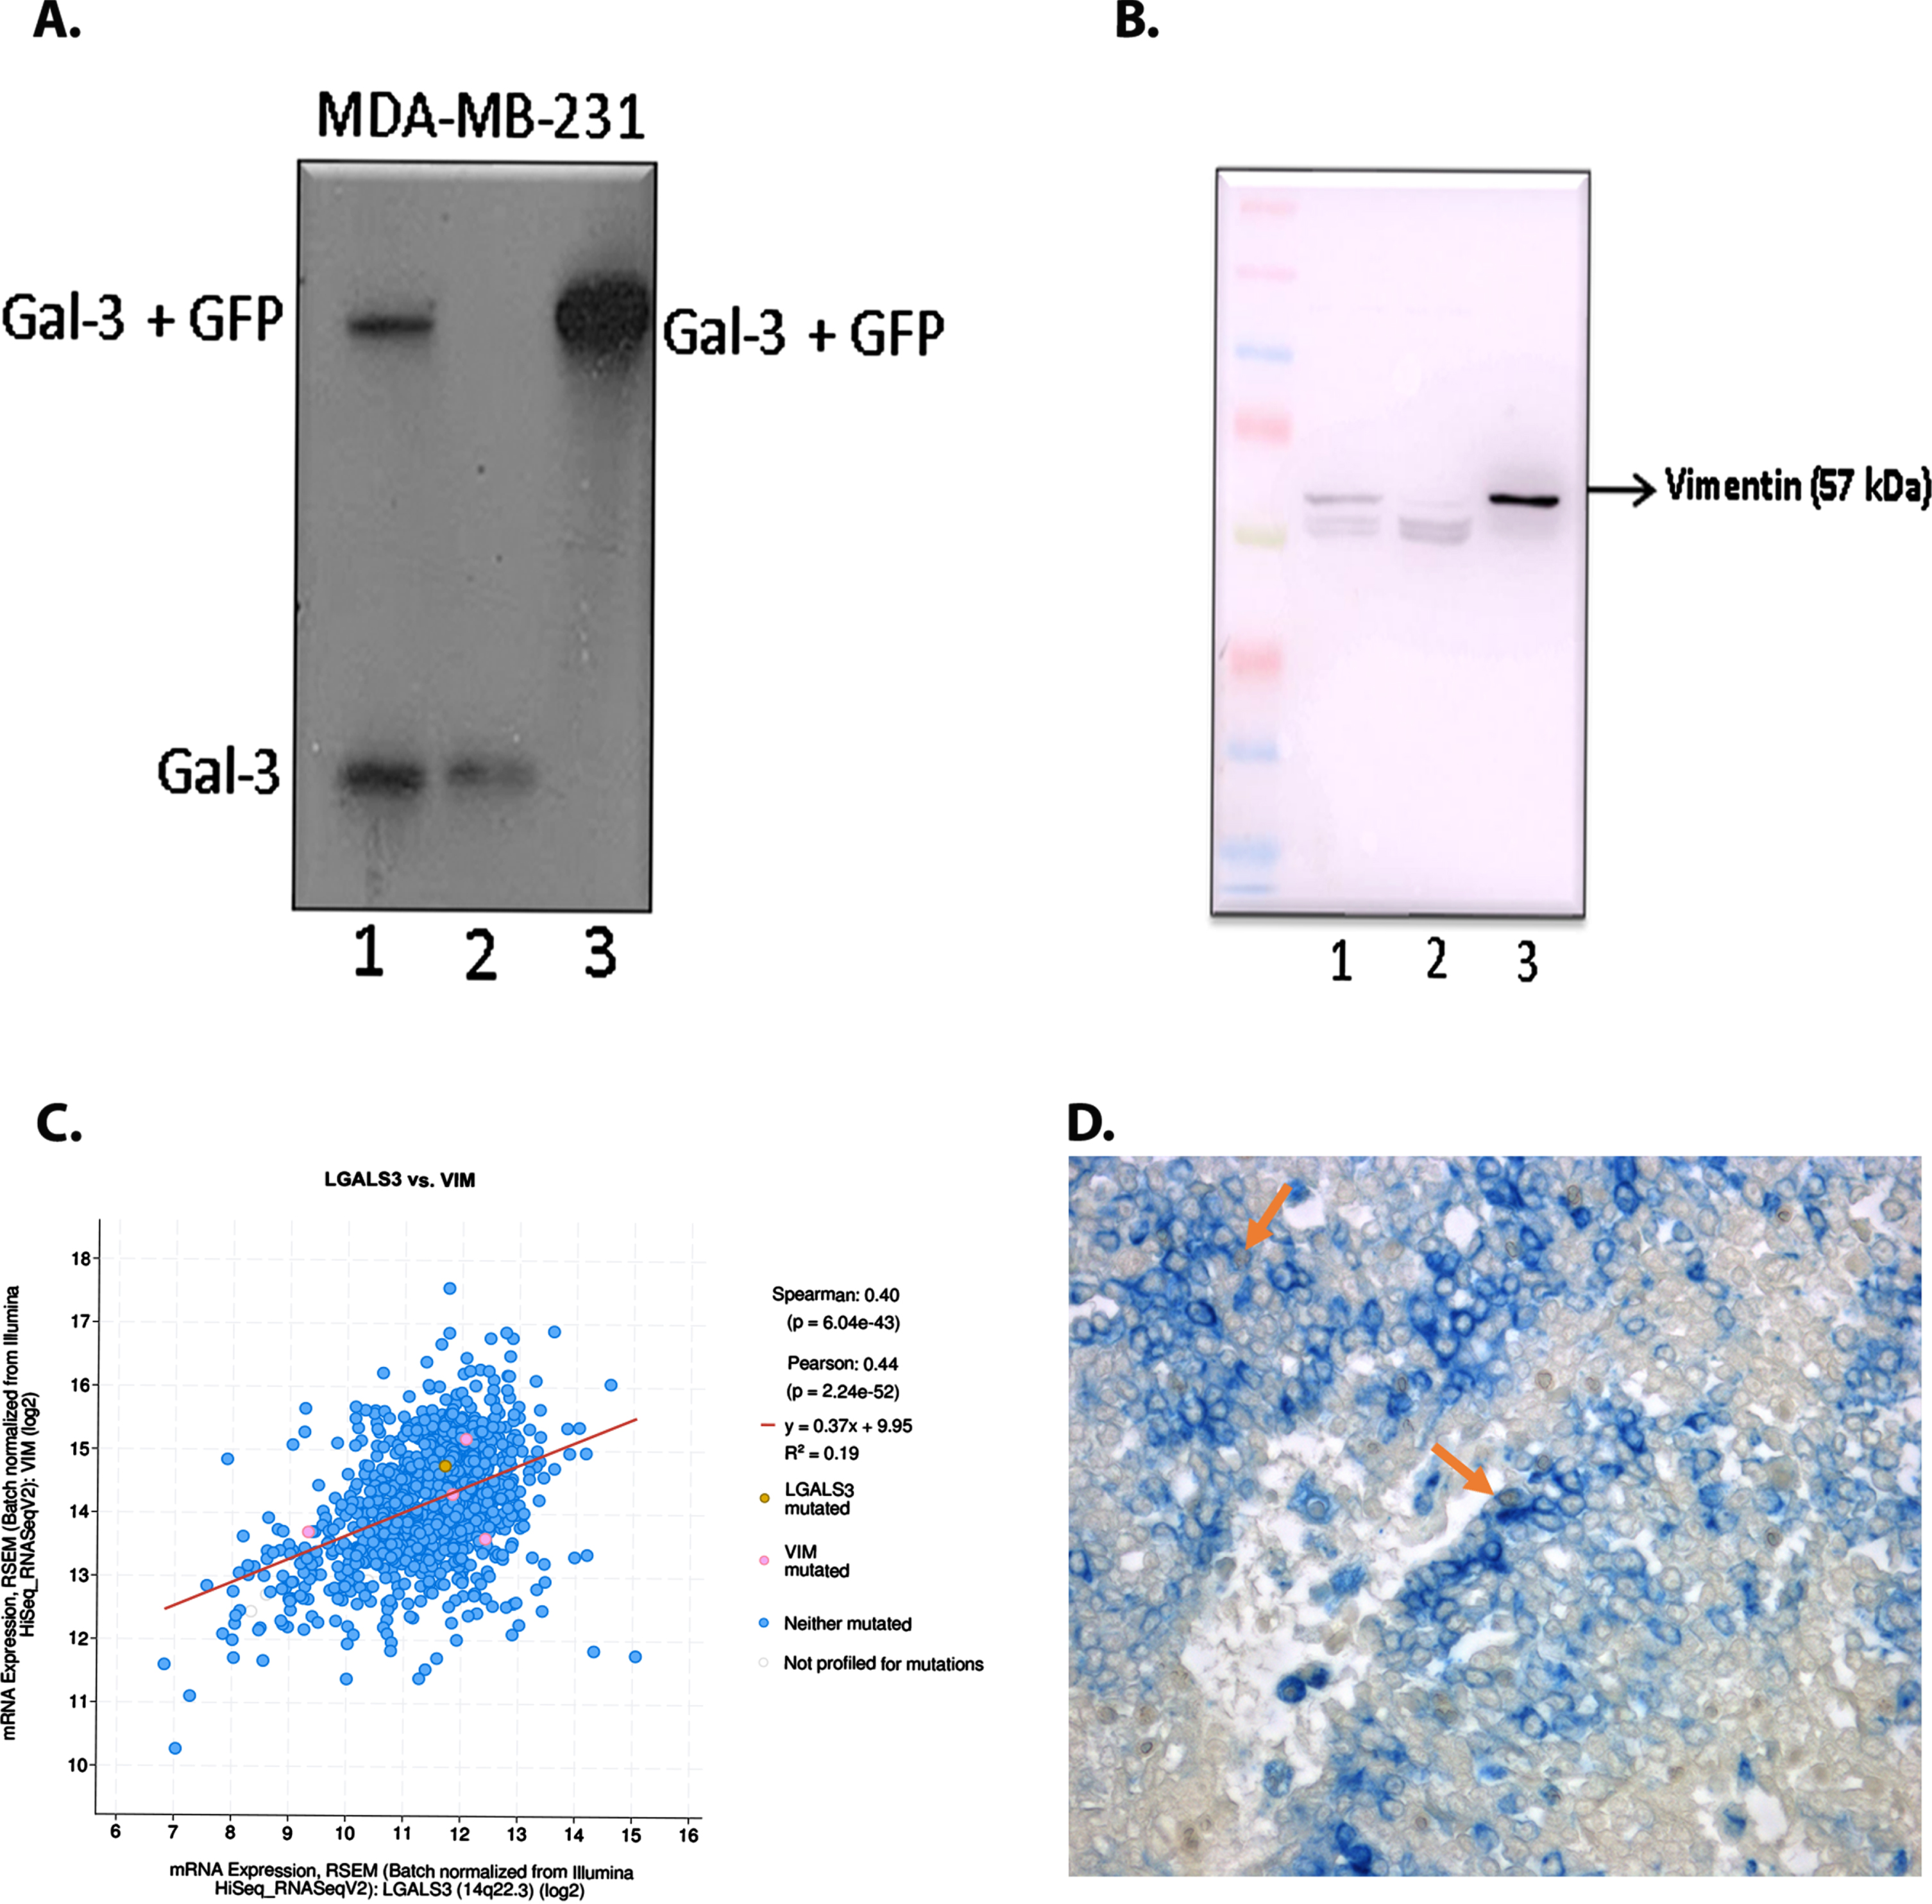 Identification of galectin-3-interacting proteins A. Overexpressed galectin-3 fraction with GFP after pull down assay using GFP-TRAP was confirmed using western blotting [1-Input (Protein sample from Galectin-3-GFP overexpressed MDA-MB-231 cells), 2- Unbound (Supernatant of protein sample after incubation with GFP-trap beads), 3- Bound (Galectin-3-GFP protein bound to the GFP-TRAP beads)]. B. Pull down sample subjected to immunoblotting analysis was found to have vimentin protein substantiating the association of vimentin with galectin-3 (1-Input, 2- Unbound, 3- Bound). C. Co-expression analysis of galectin-3 and vimentin done using m-RNA data from TCGA database in cBioPortal. D. Representative image of breast tissue sample showing dual staining of galectin-3 and vimentin in tumor cells (Magnification: 20X). Arrow indicates tumor cells co-expressing both galectin-3 (brown) in the cytoplasm and vimentin (blue) in the membrane.